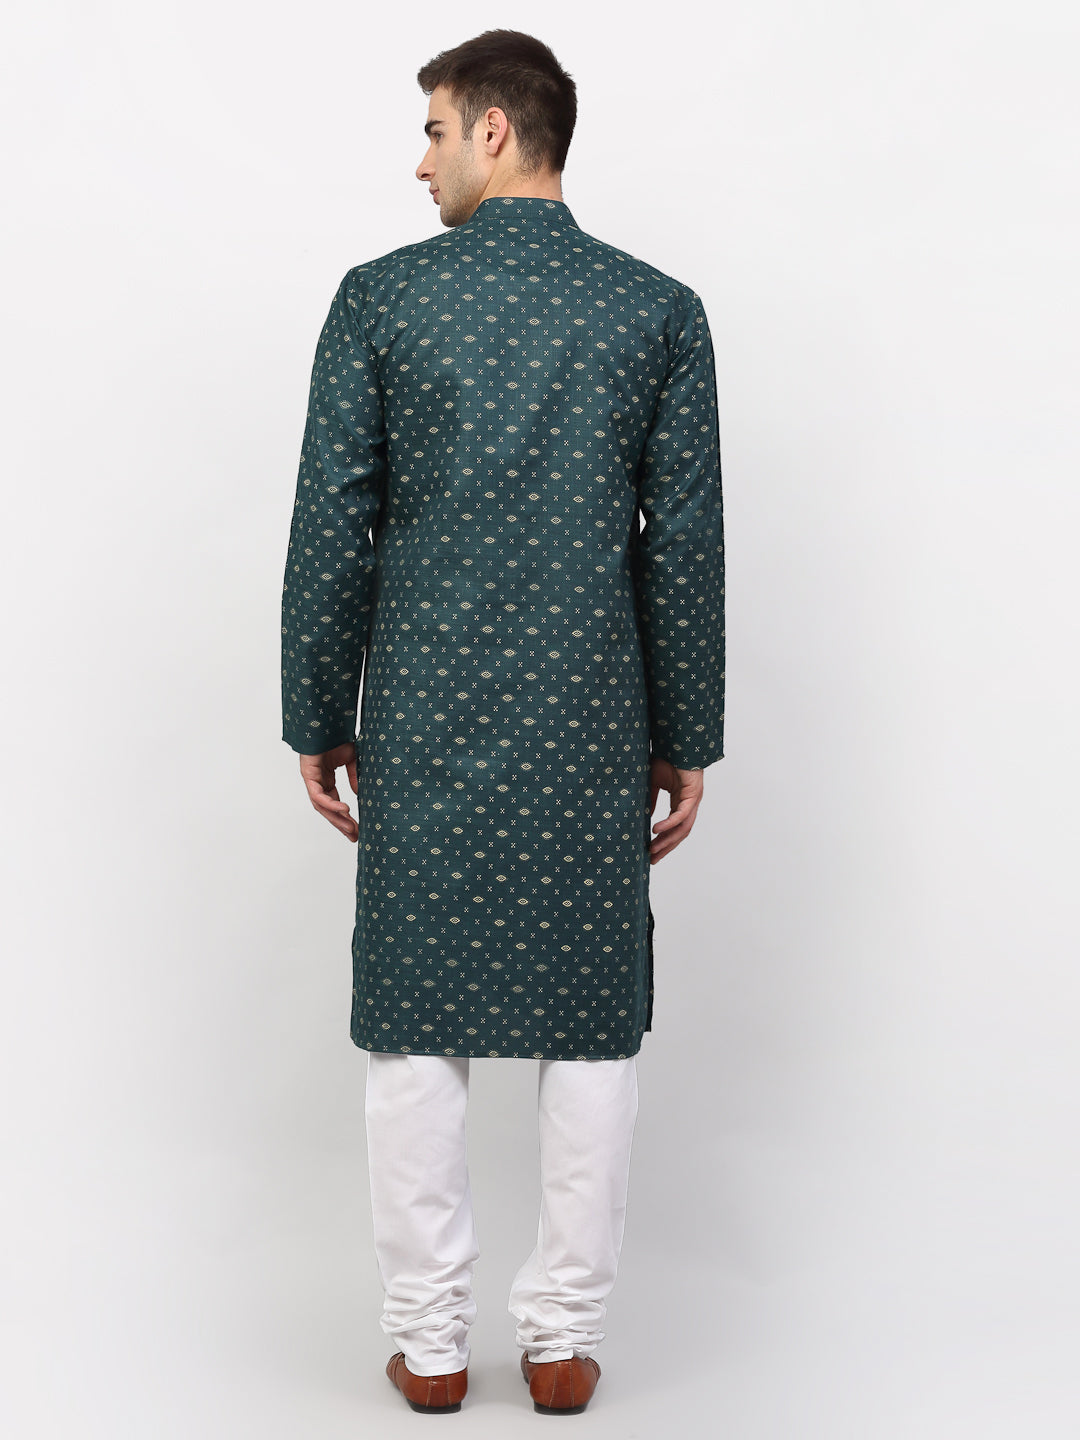 Jompers Men's Olive Printed Cotton Kurta Only